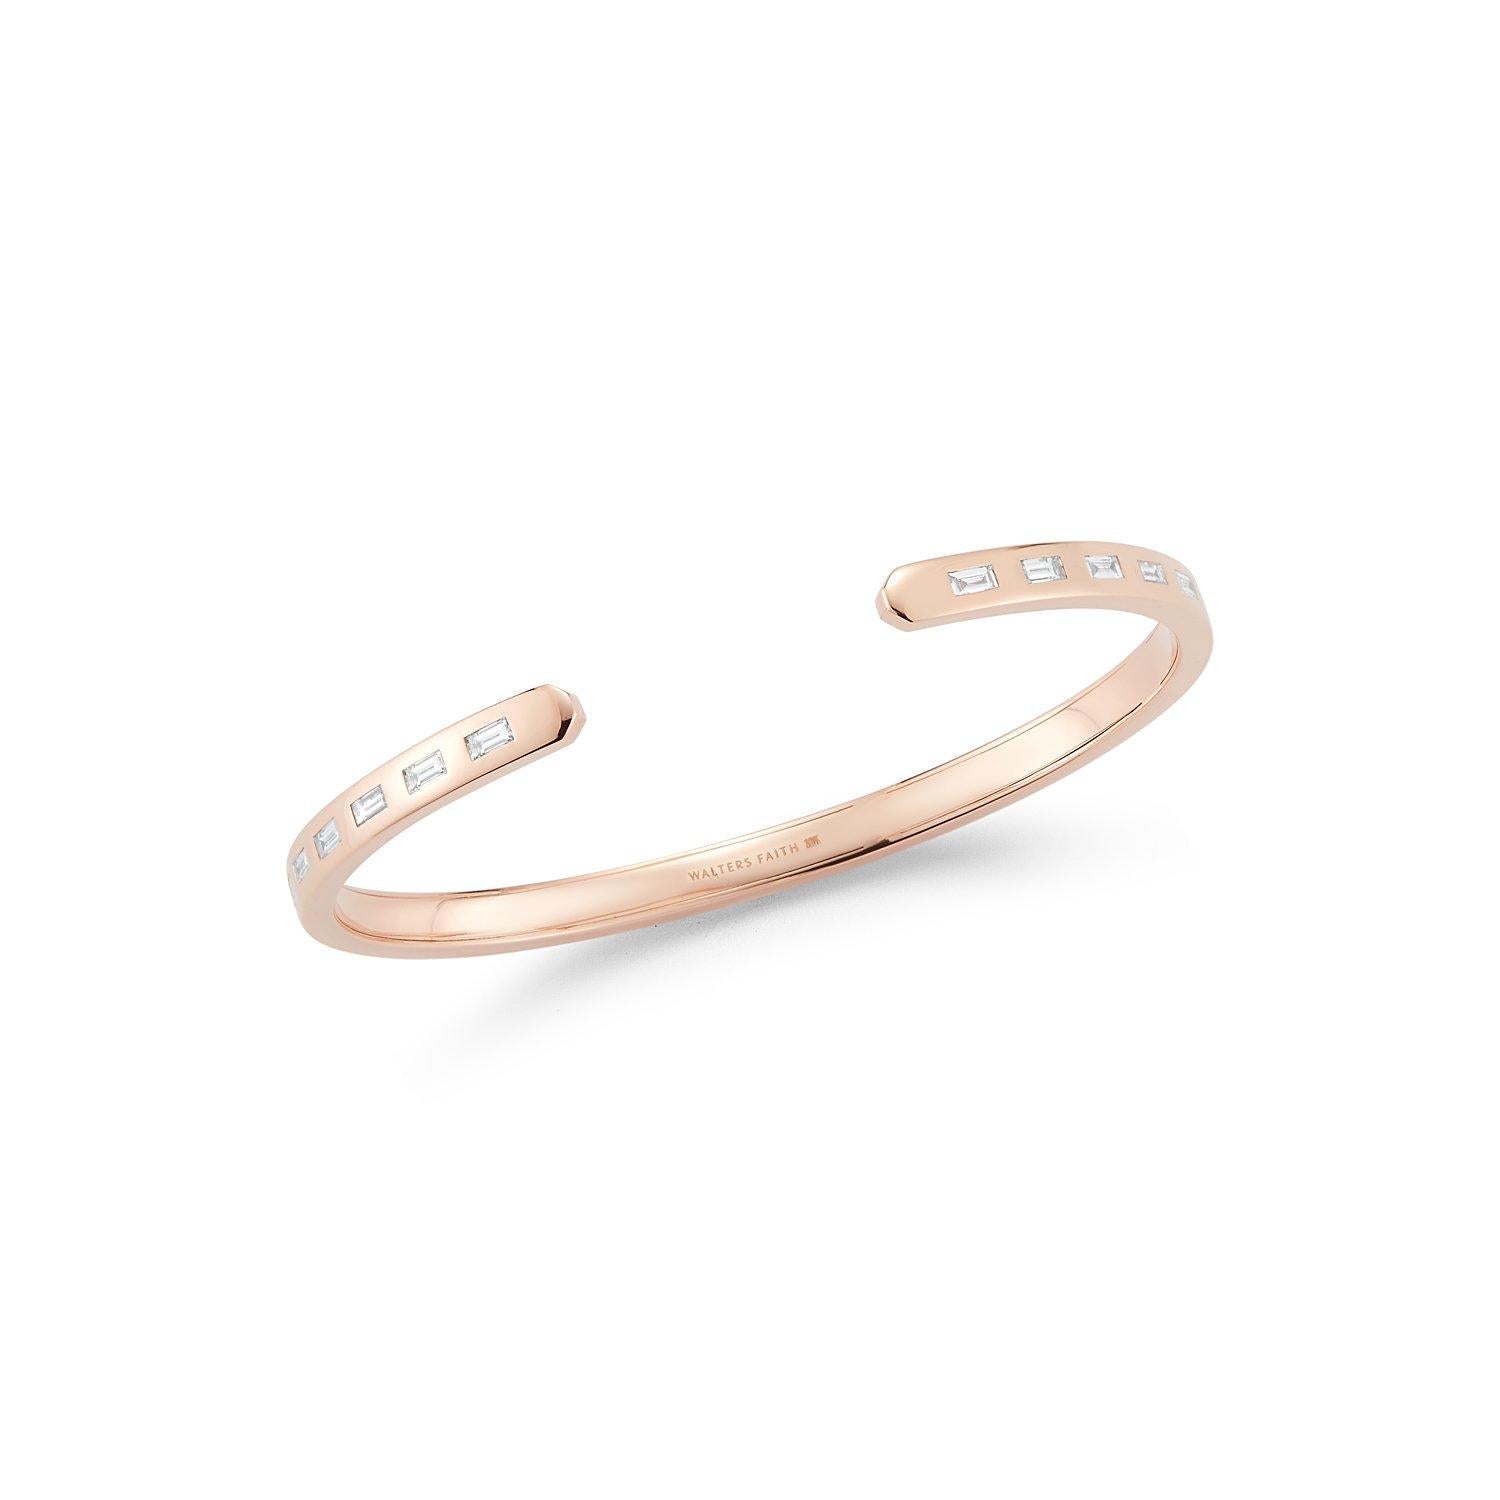 Walters Faith's Ottoline Collection 18K Rose Gold and Diamond Baguette Cuff. Cuff can be worn with opening face up or down. Cuff is available in size 6, 6.5 or 7
 
Also available for custom order in 18K Yellow Gold or 18K White Gold. For any special